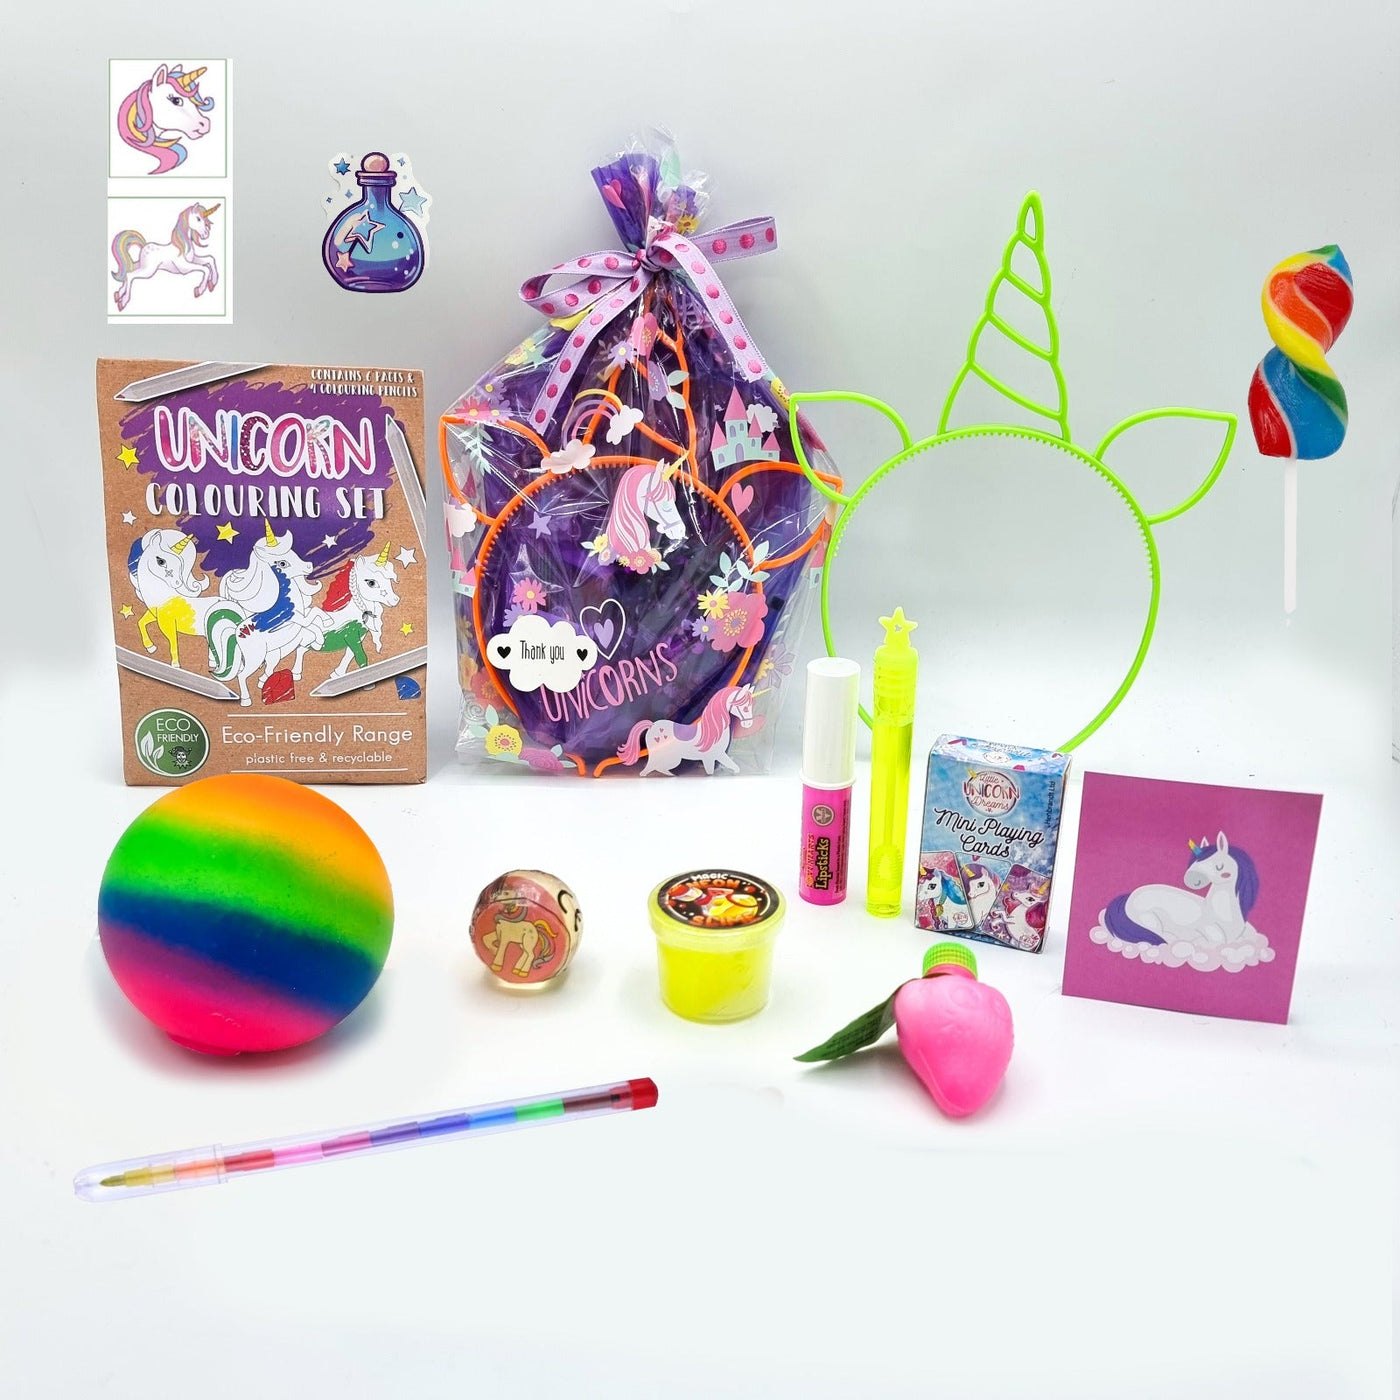 Pre Filled Girls Birthday Unicorn Party Goody Bags With Toys And Sweets, Party Favours.